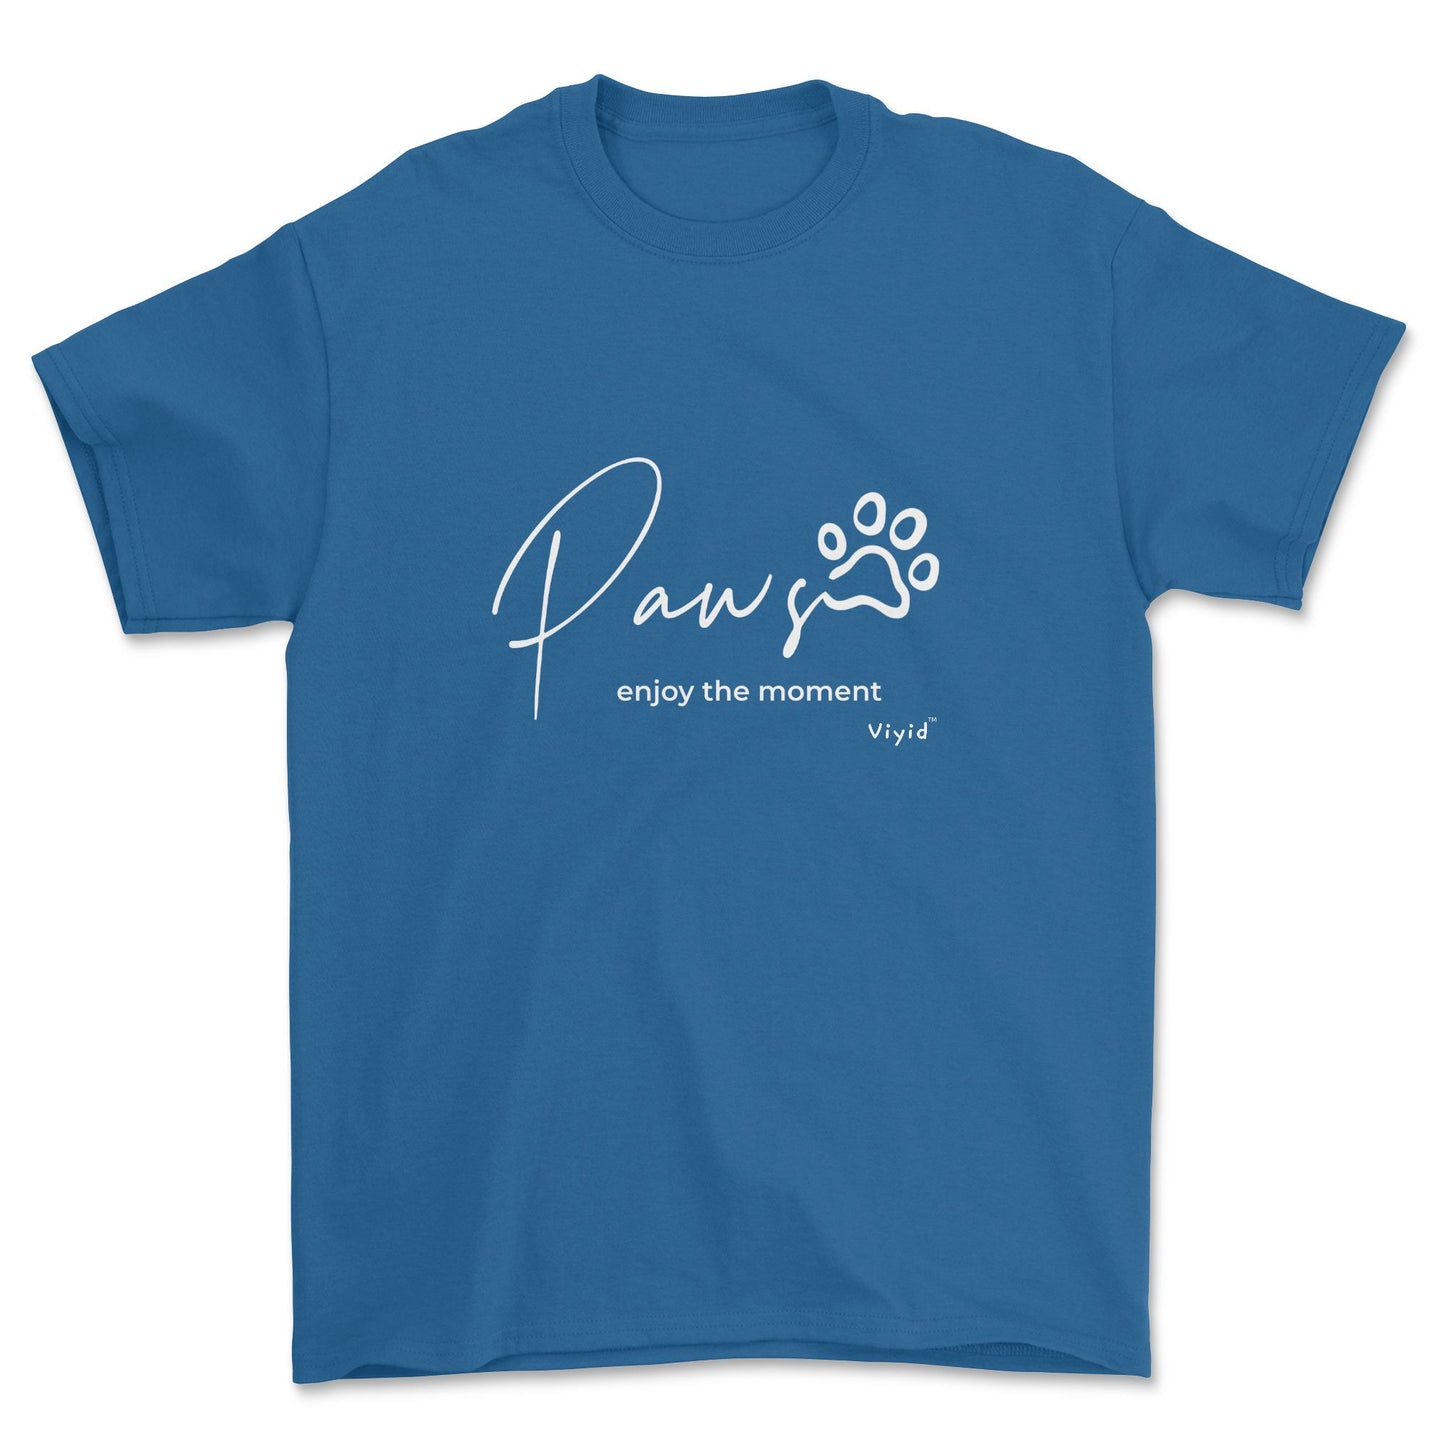 paws enjoy the moment youth t-shirt royal